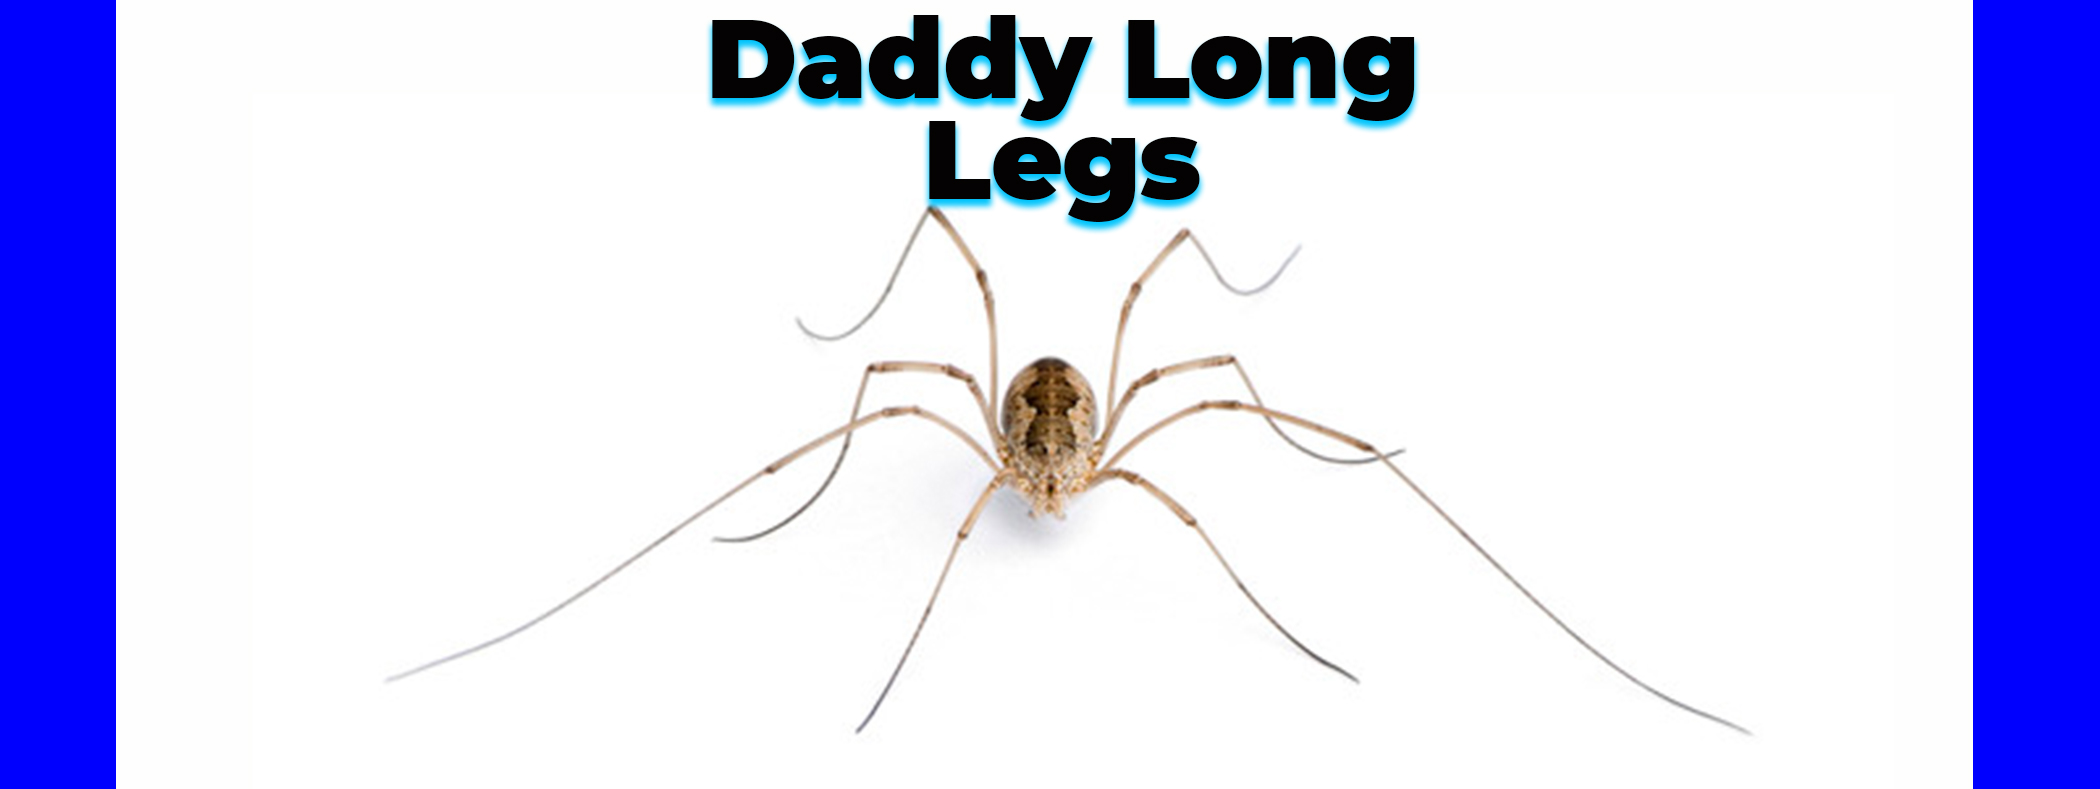 With Long Legs 